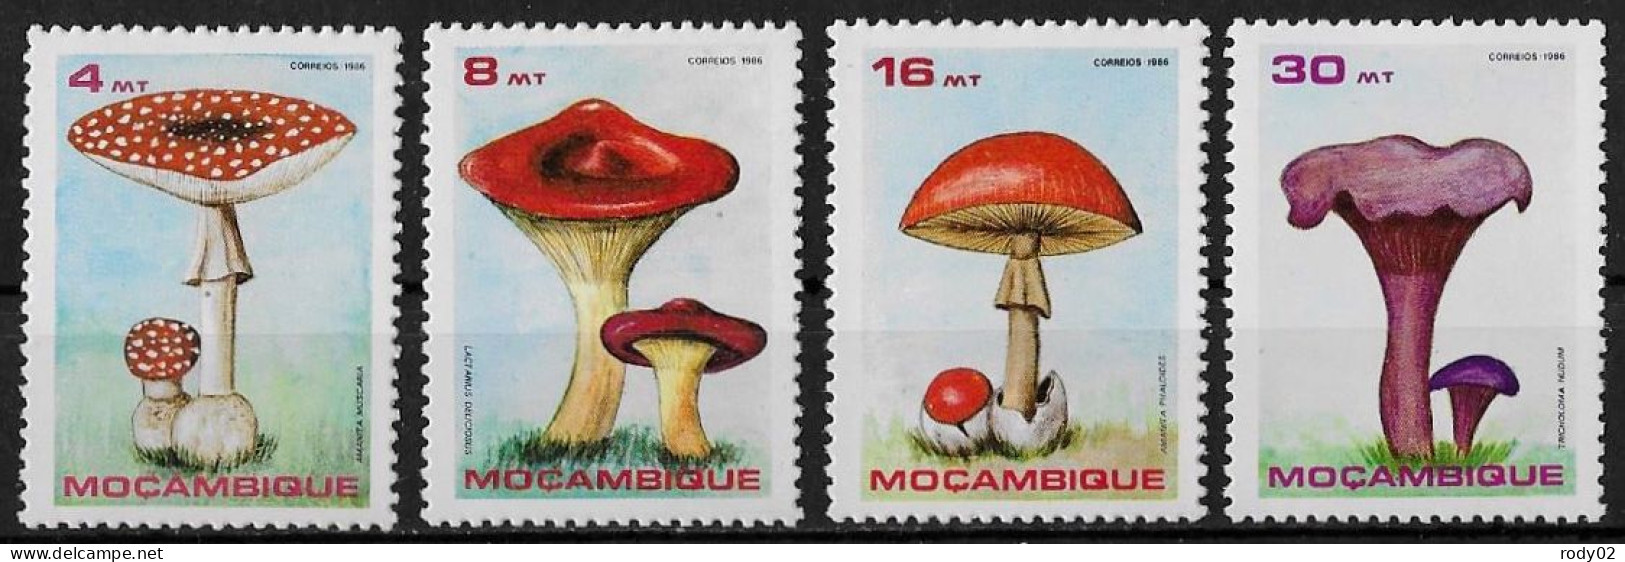 MOZAMBIQUE - CHAMPIGNONS - N° 1029 A 1032 - NEUF** MNH - Funghi